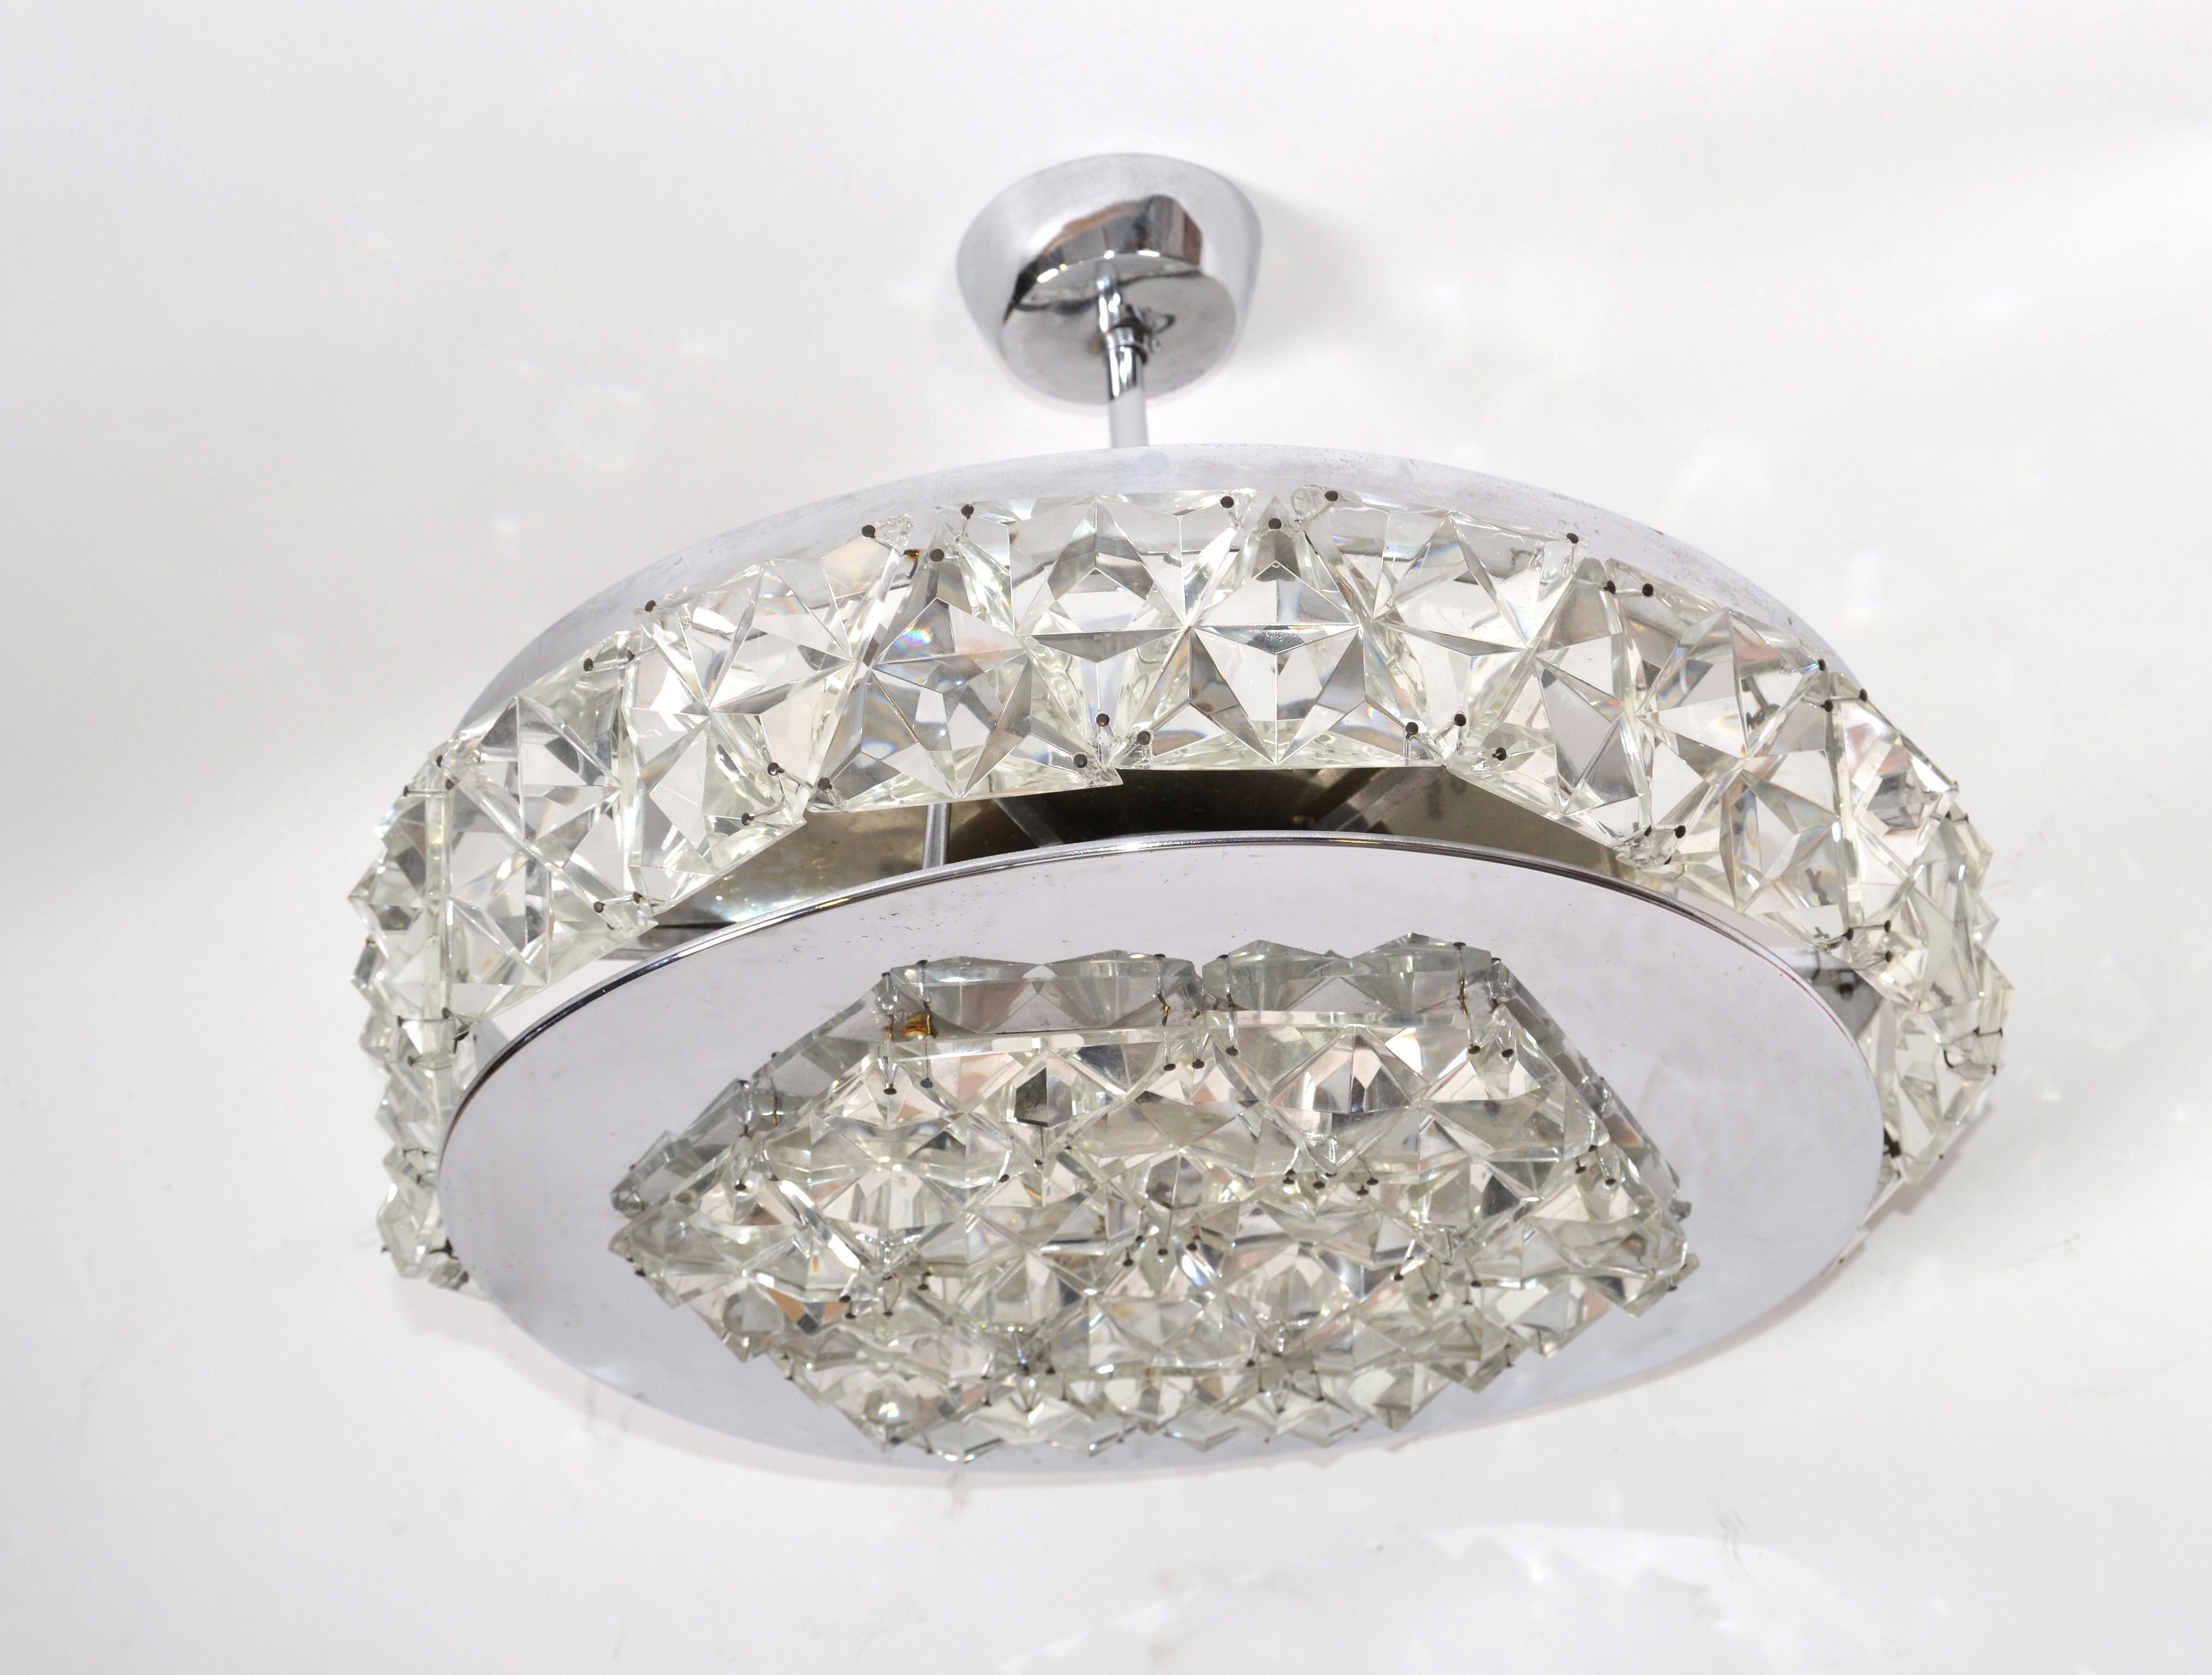 Kinkeldey Classic German 1970s chrome and crystals flushmount, ceiling light, light fixture from the late 1970s.
In working condition and uses 6 small European 40 watts light bulbs.
 